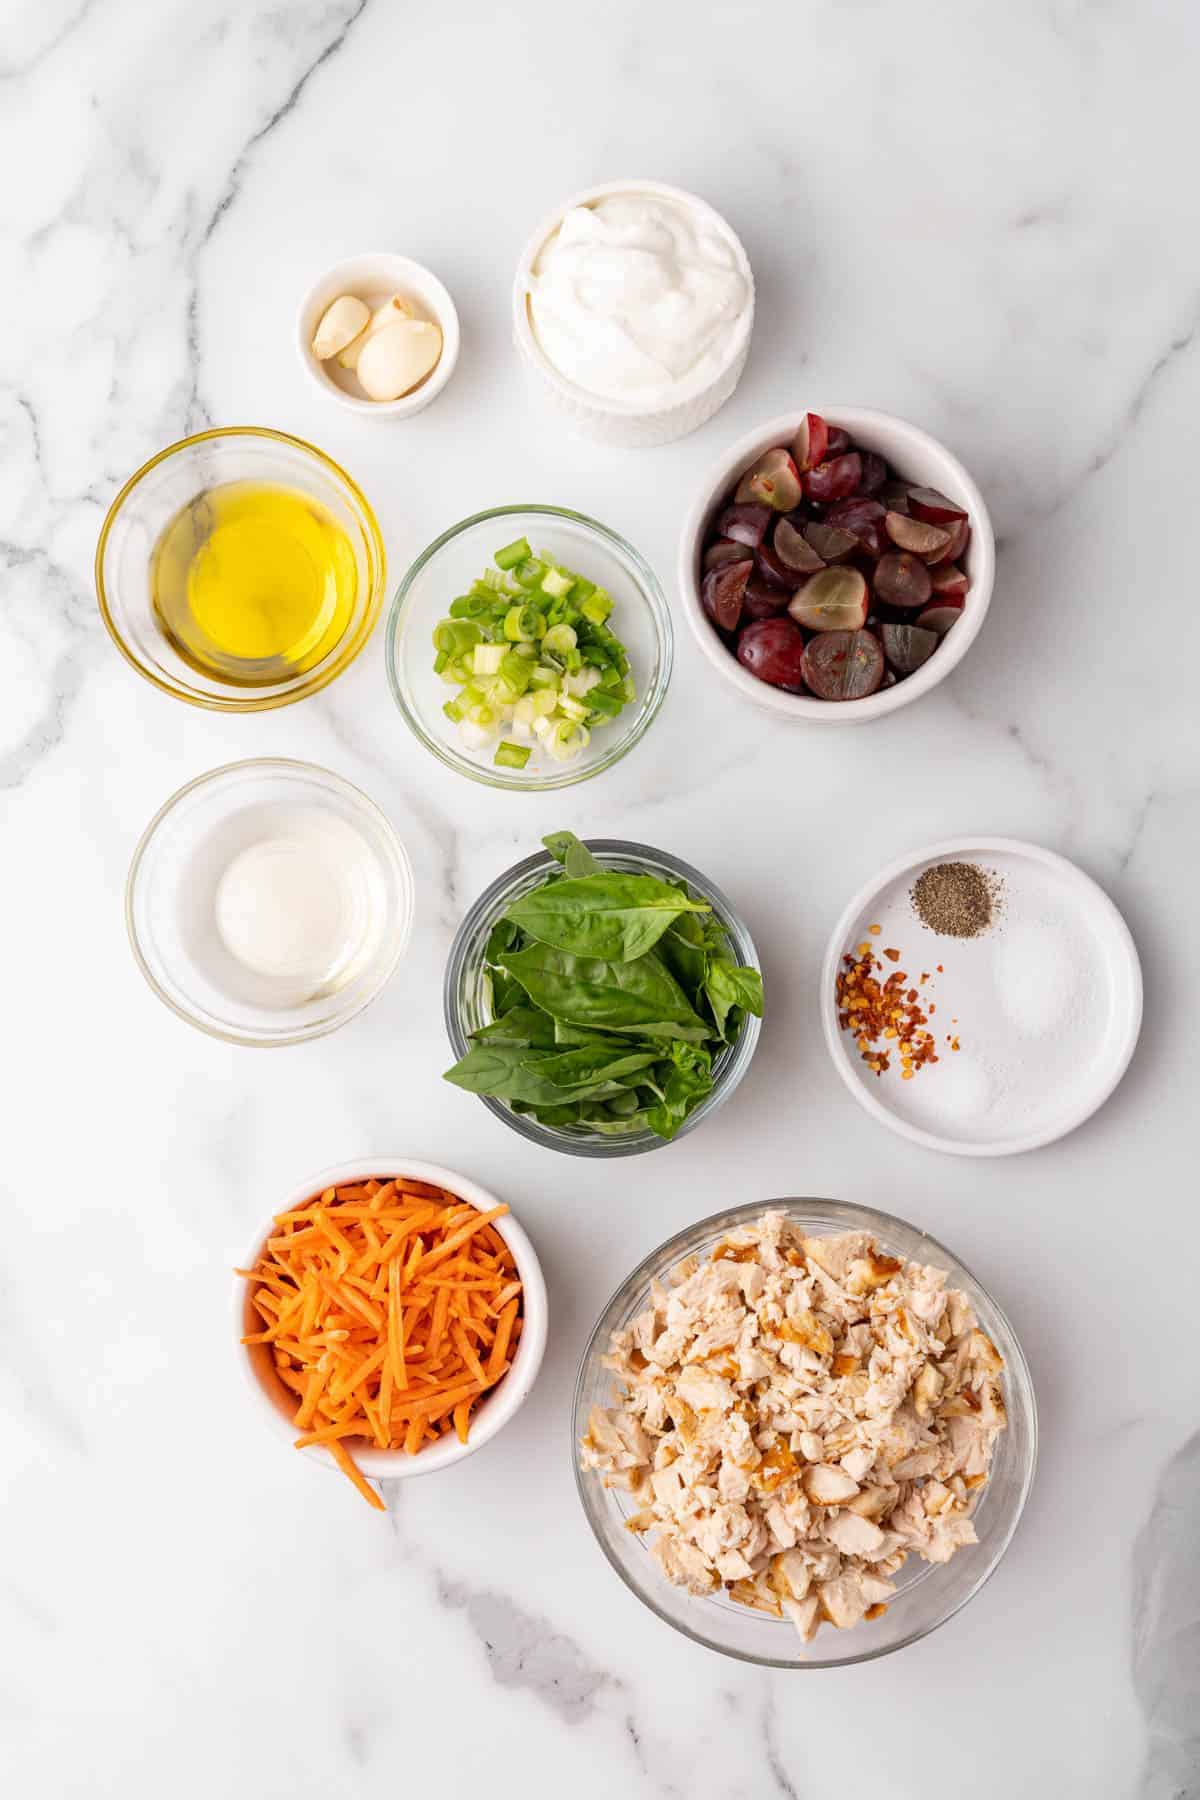 Ingredients for recipe separated into individual bowls and ramekins on a white marble surface, as seen from above